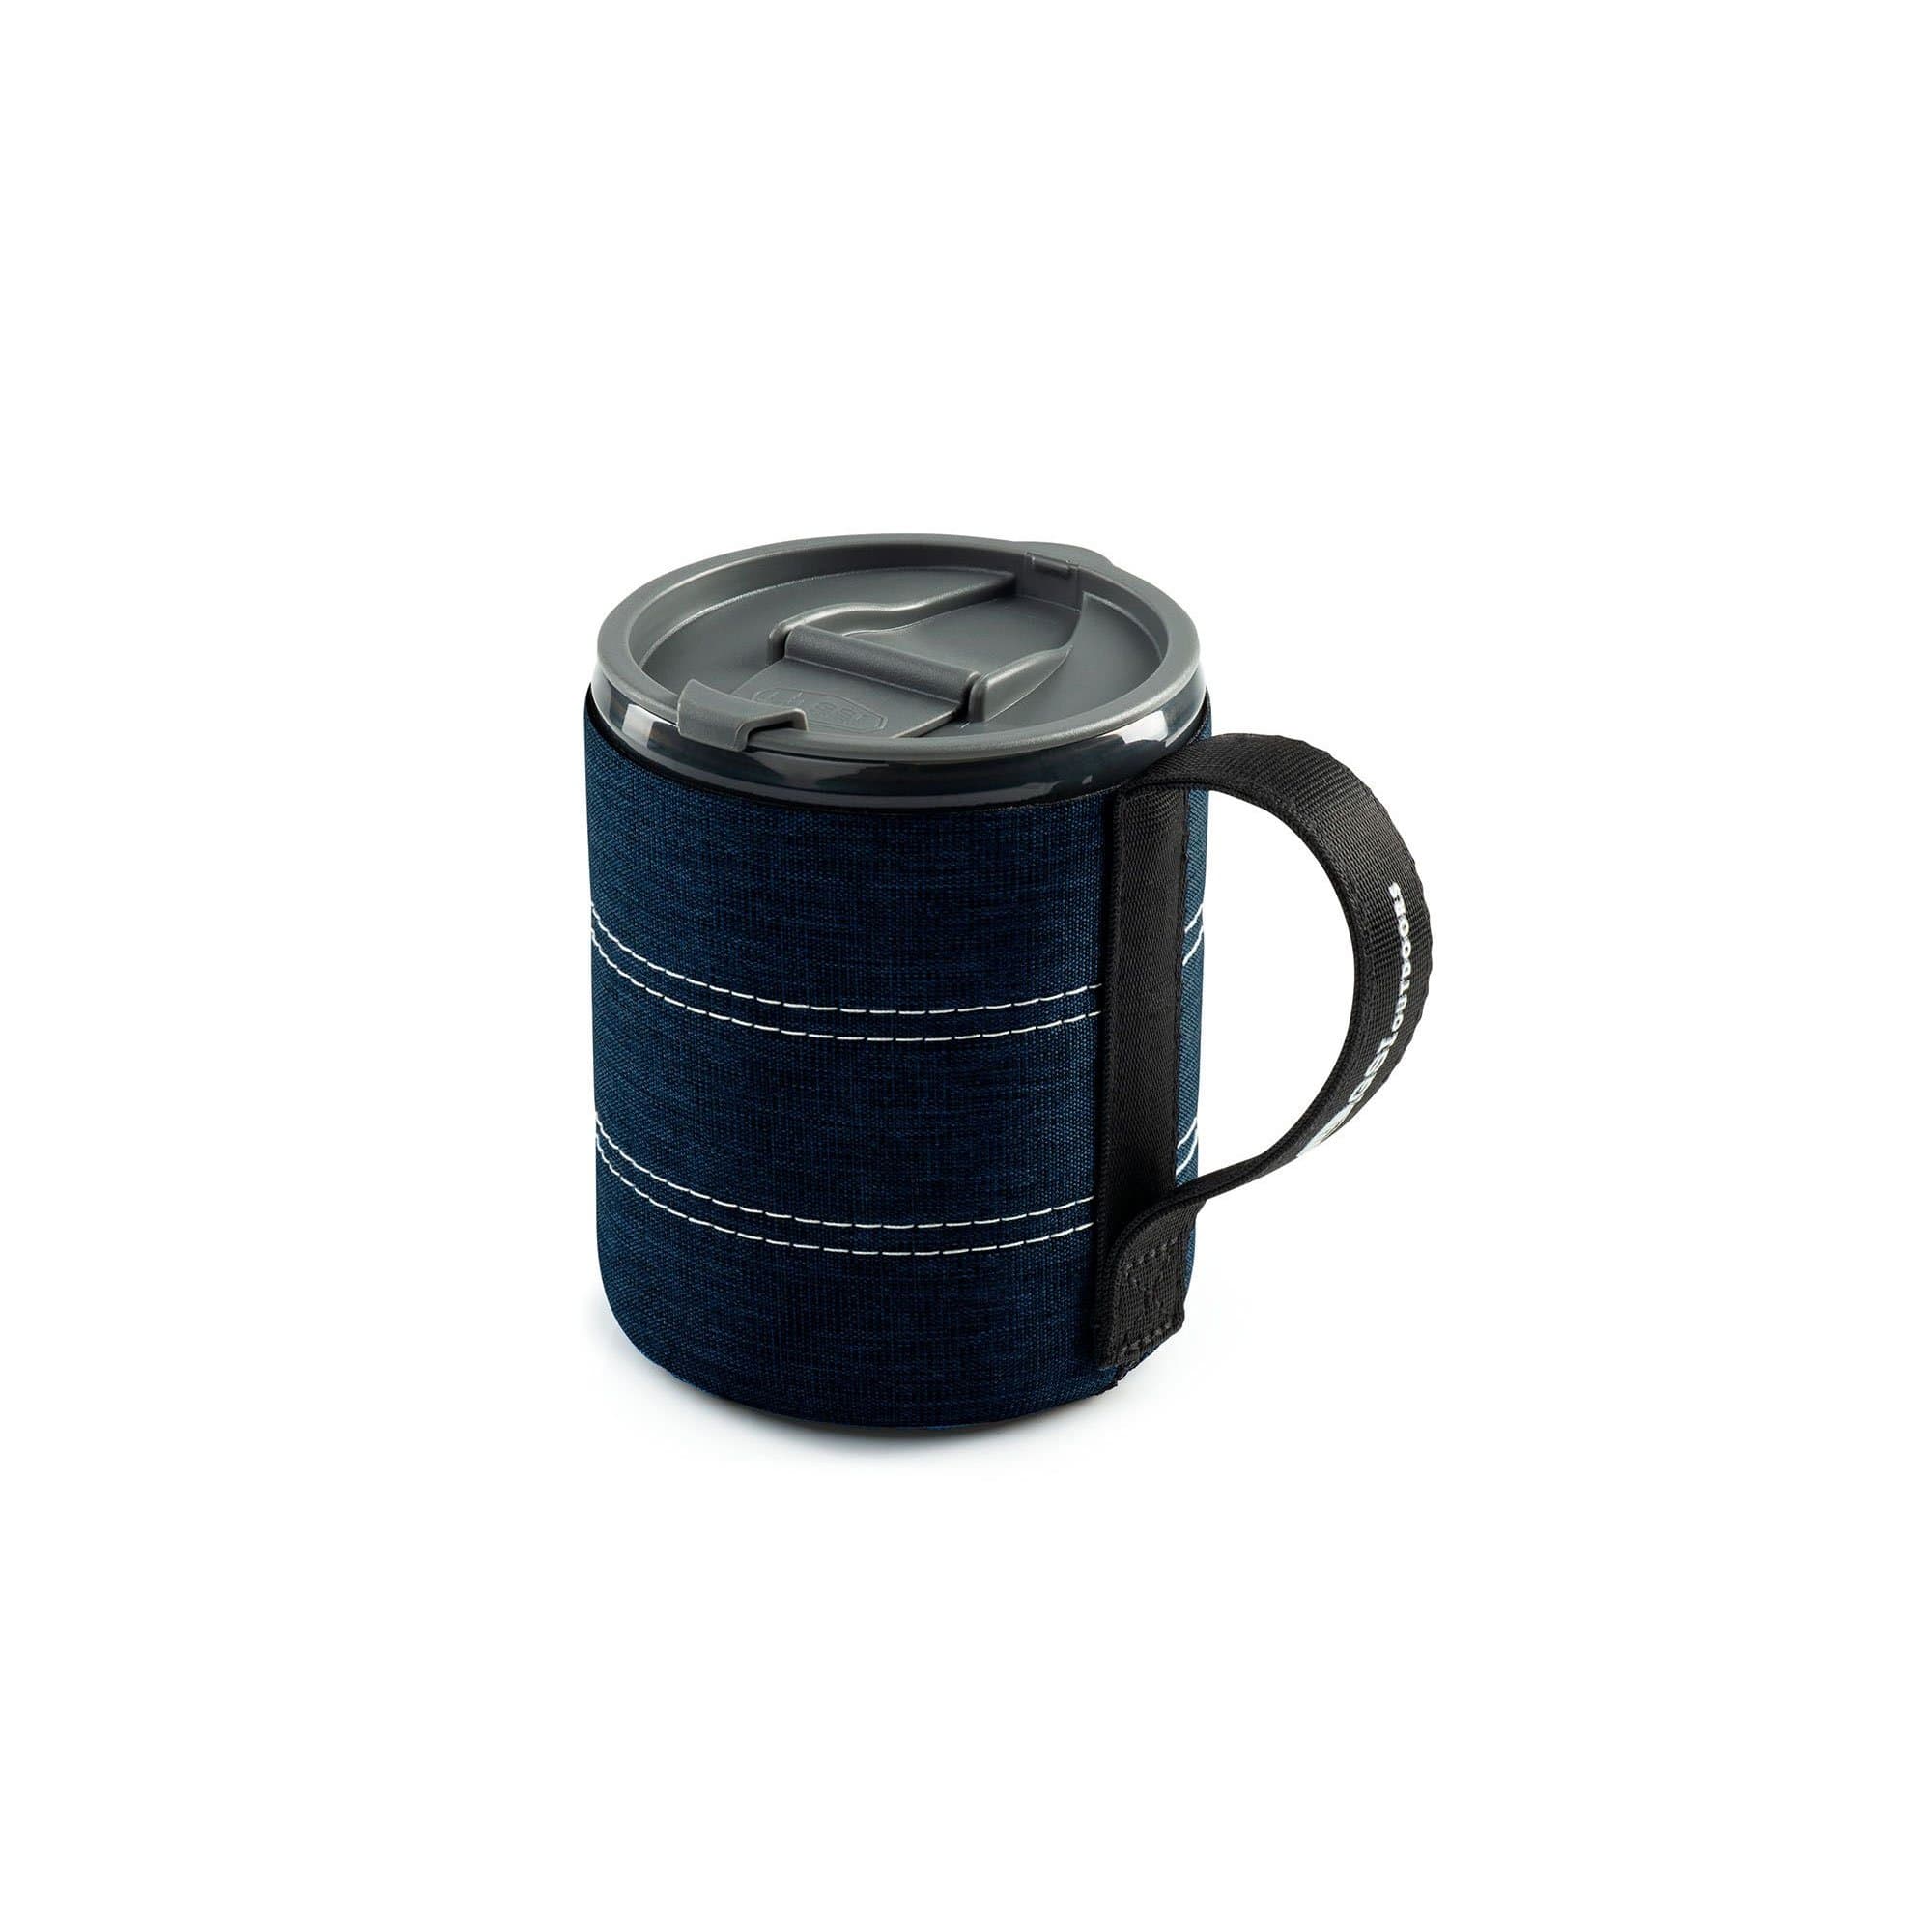 GSI Infinity Stacking Cup - Blue